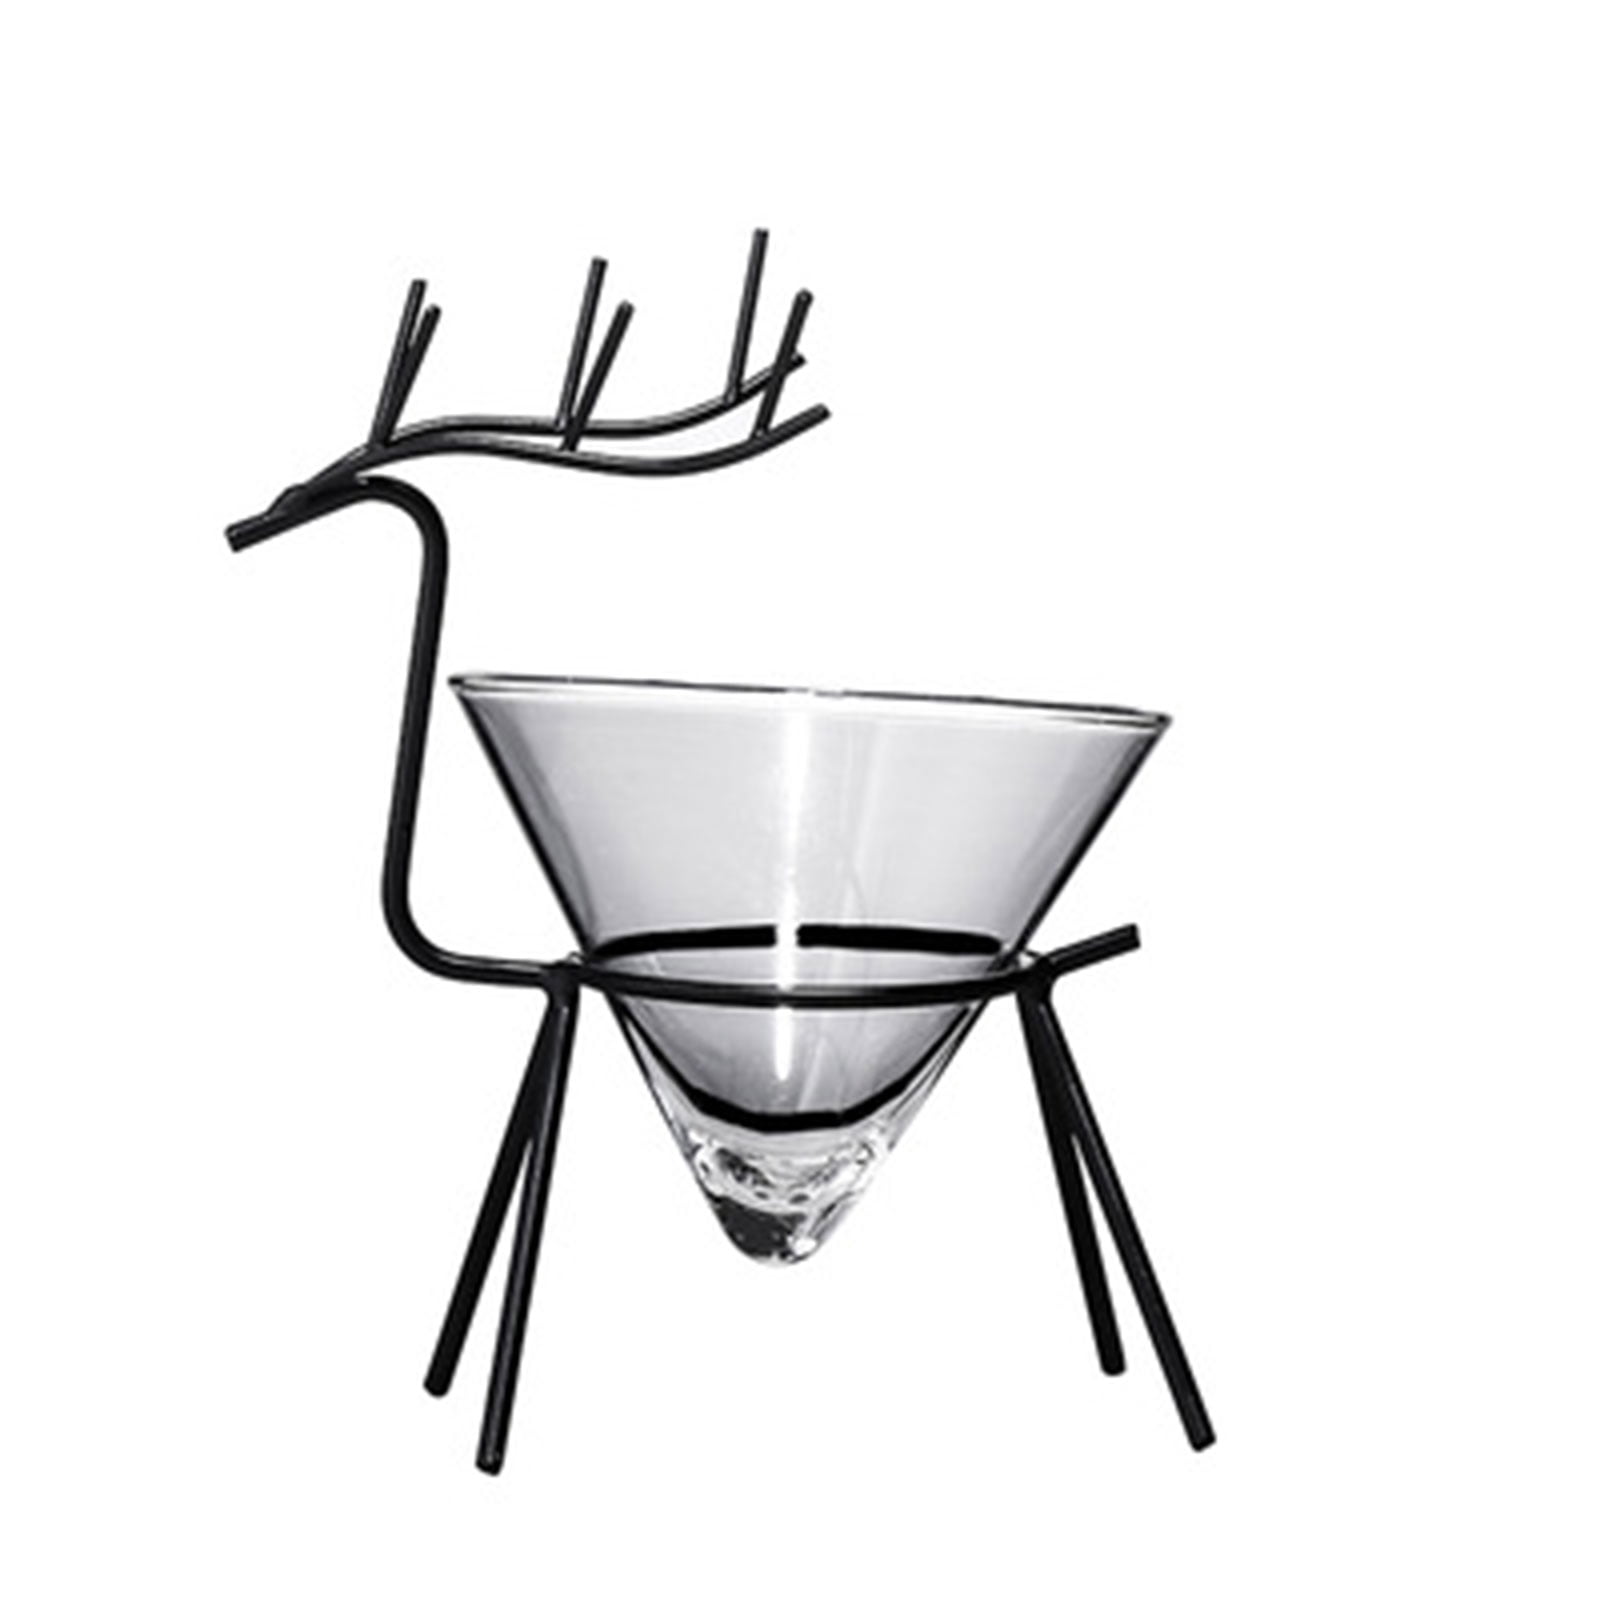 MANNYA Cocktail Glass with Iron Elk Holder Martini Wine Glass for